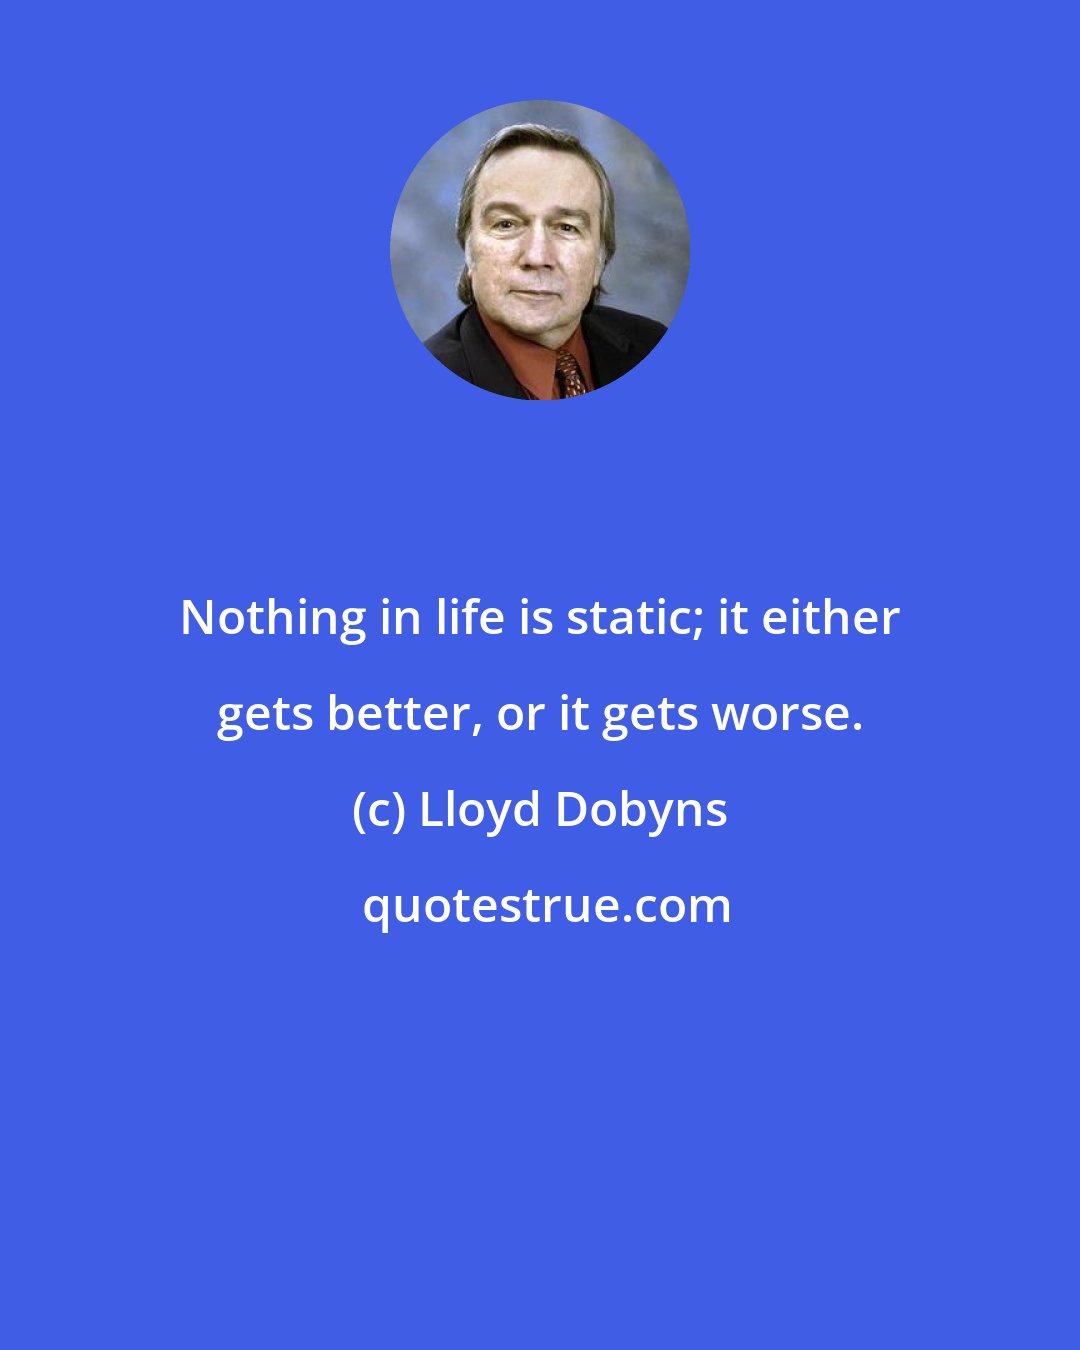 Lloyd Dobyns: Nothing in life is static; it either gets better, or it gets worse.